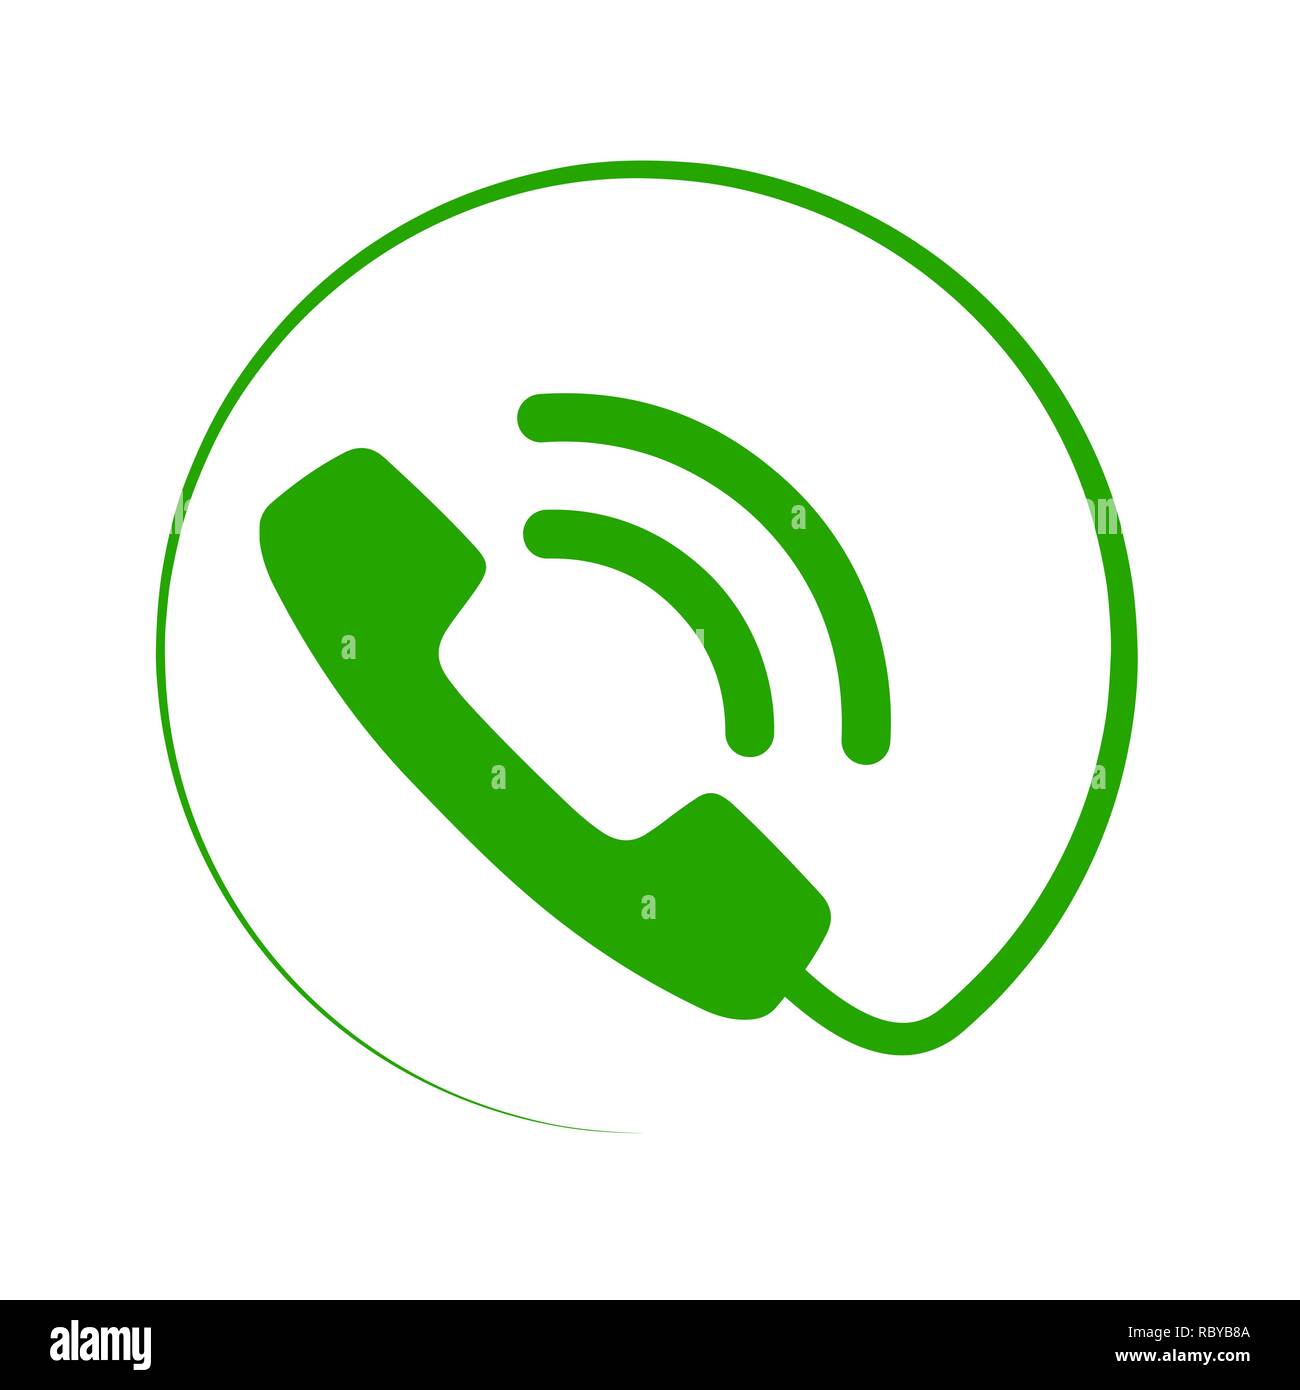 Phone Icon In Flat Style Vector Illustration Green Telephone Symbol